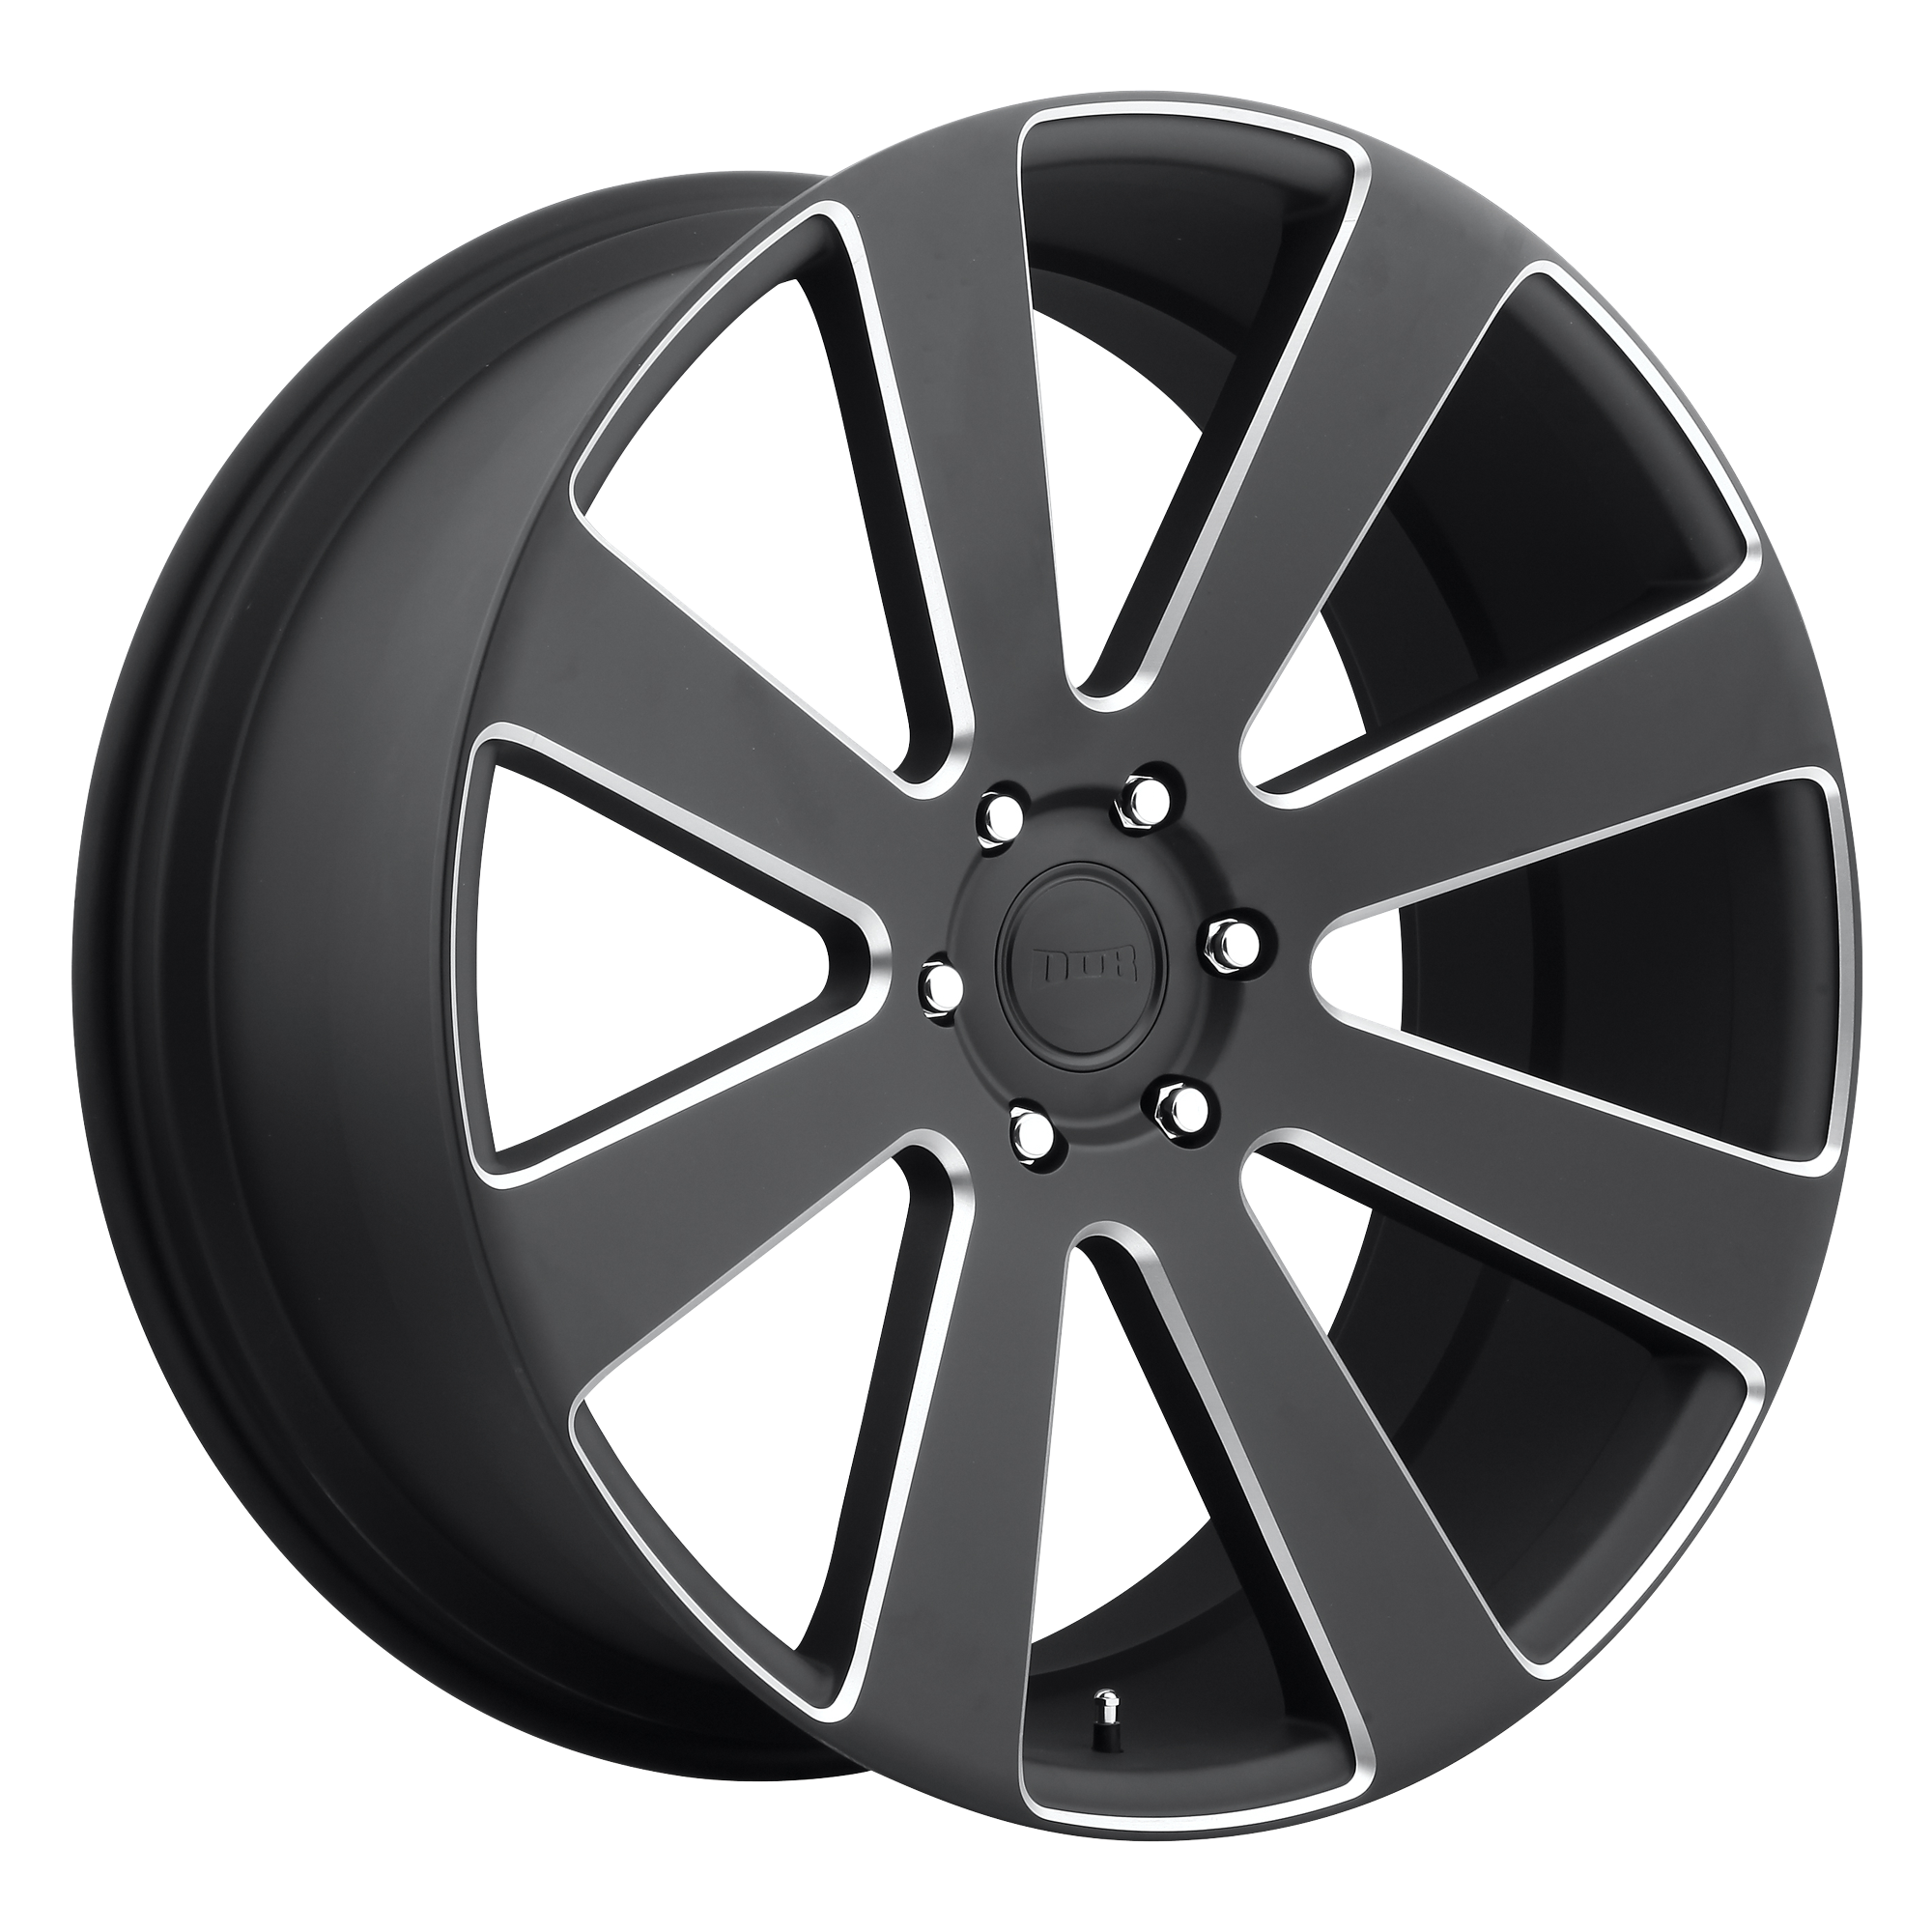 8-BALL 22x9.5 6x135.00 MATTE BLACK MILLED (30 mm) - Tires and Engine Performance